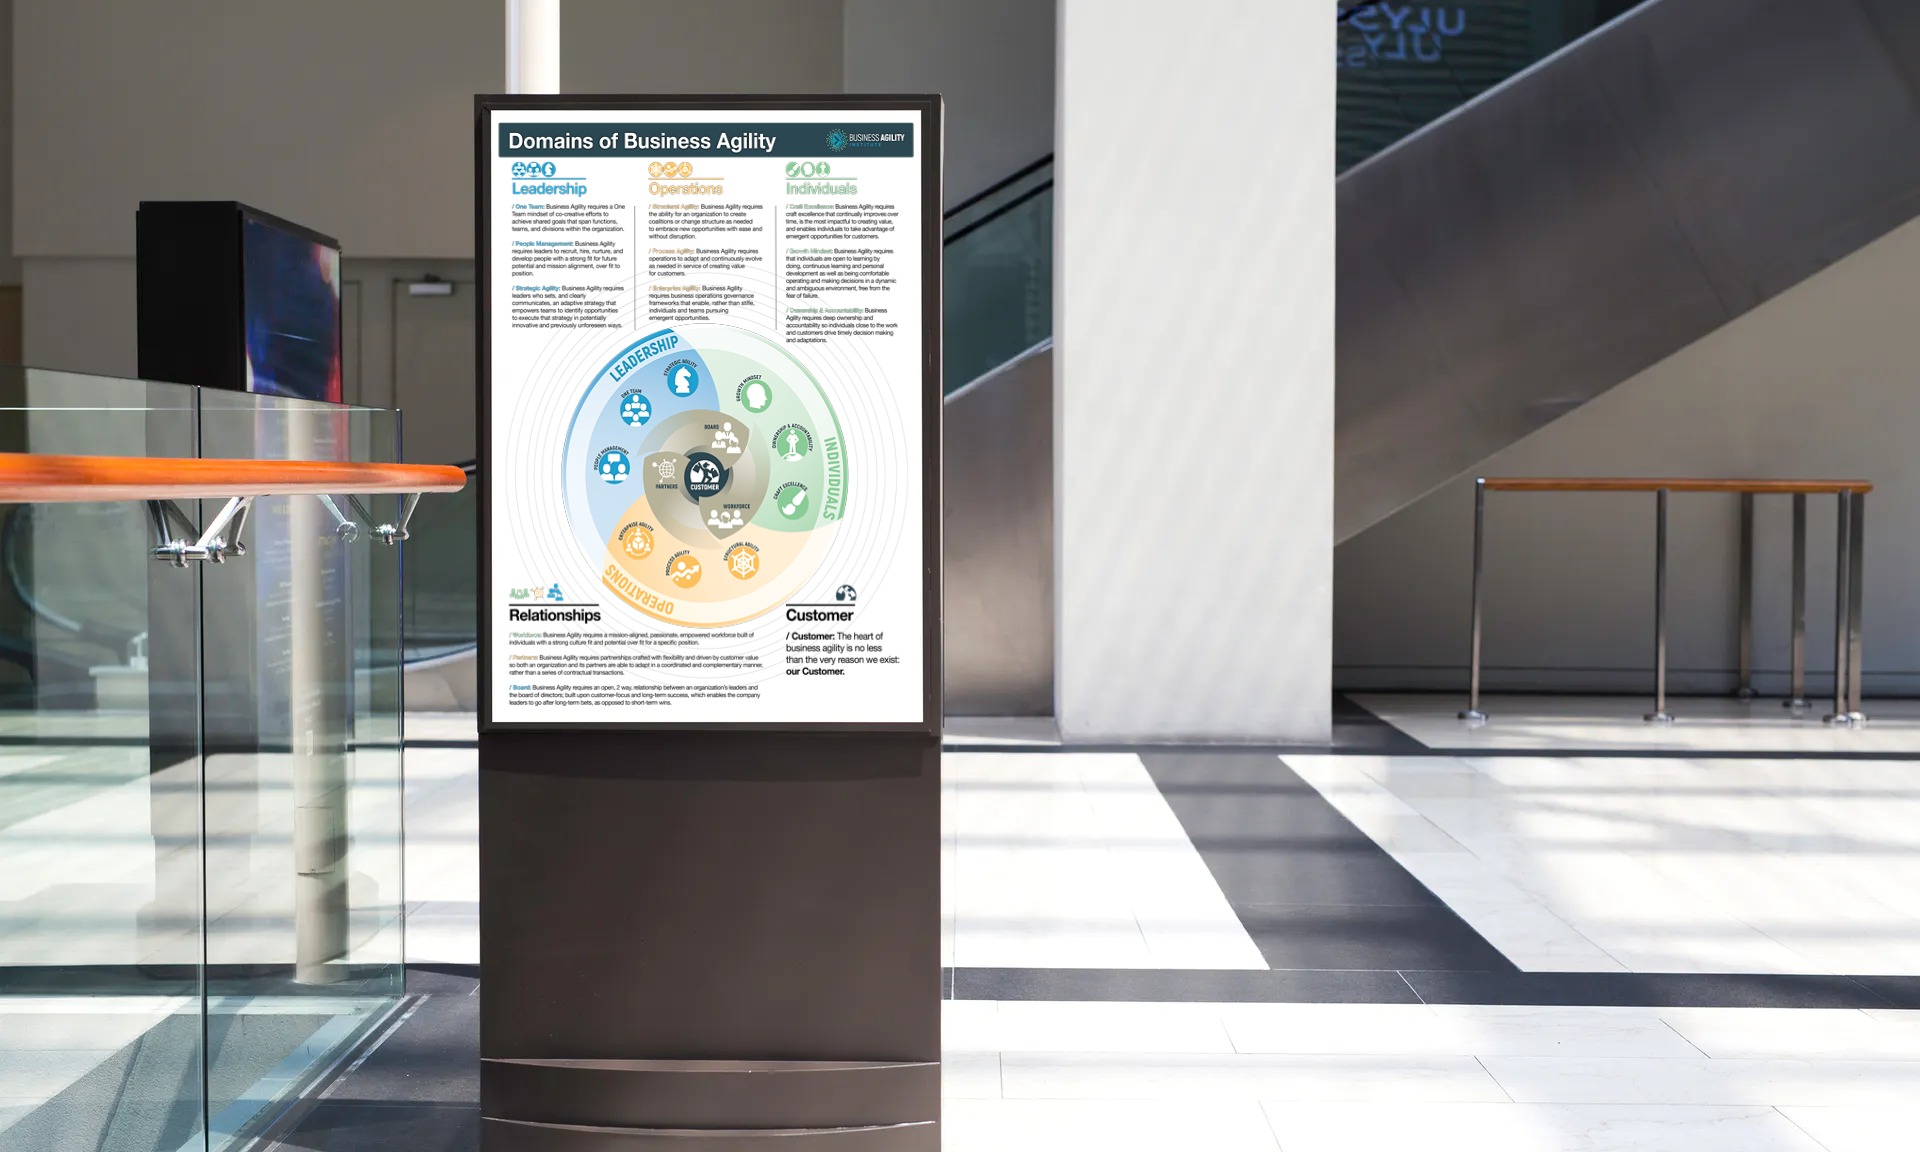 Downloadable Posters for the Domains of Business Agility